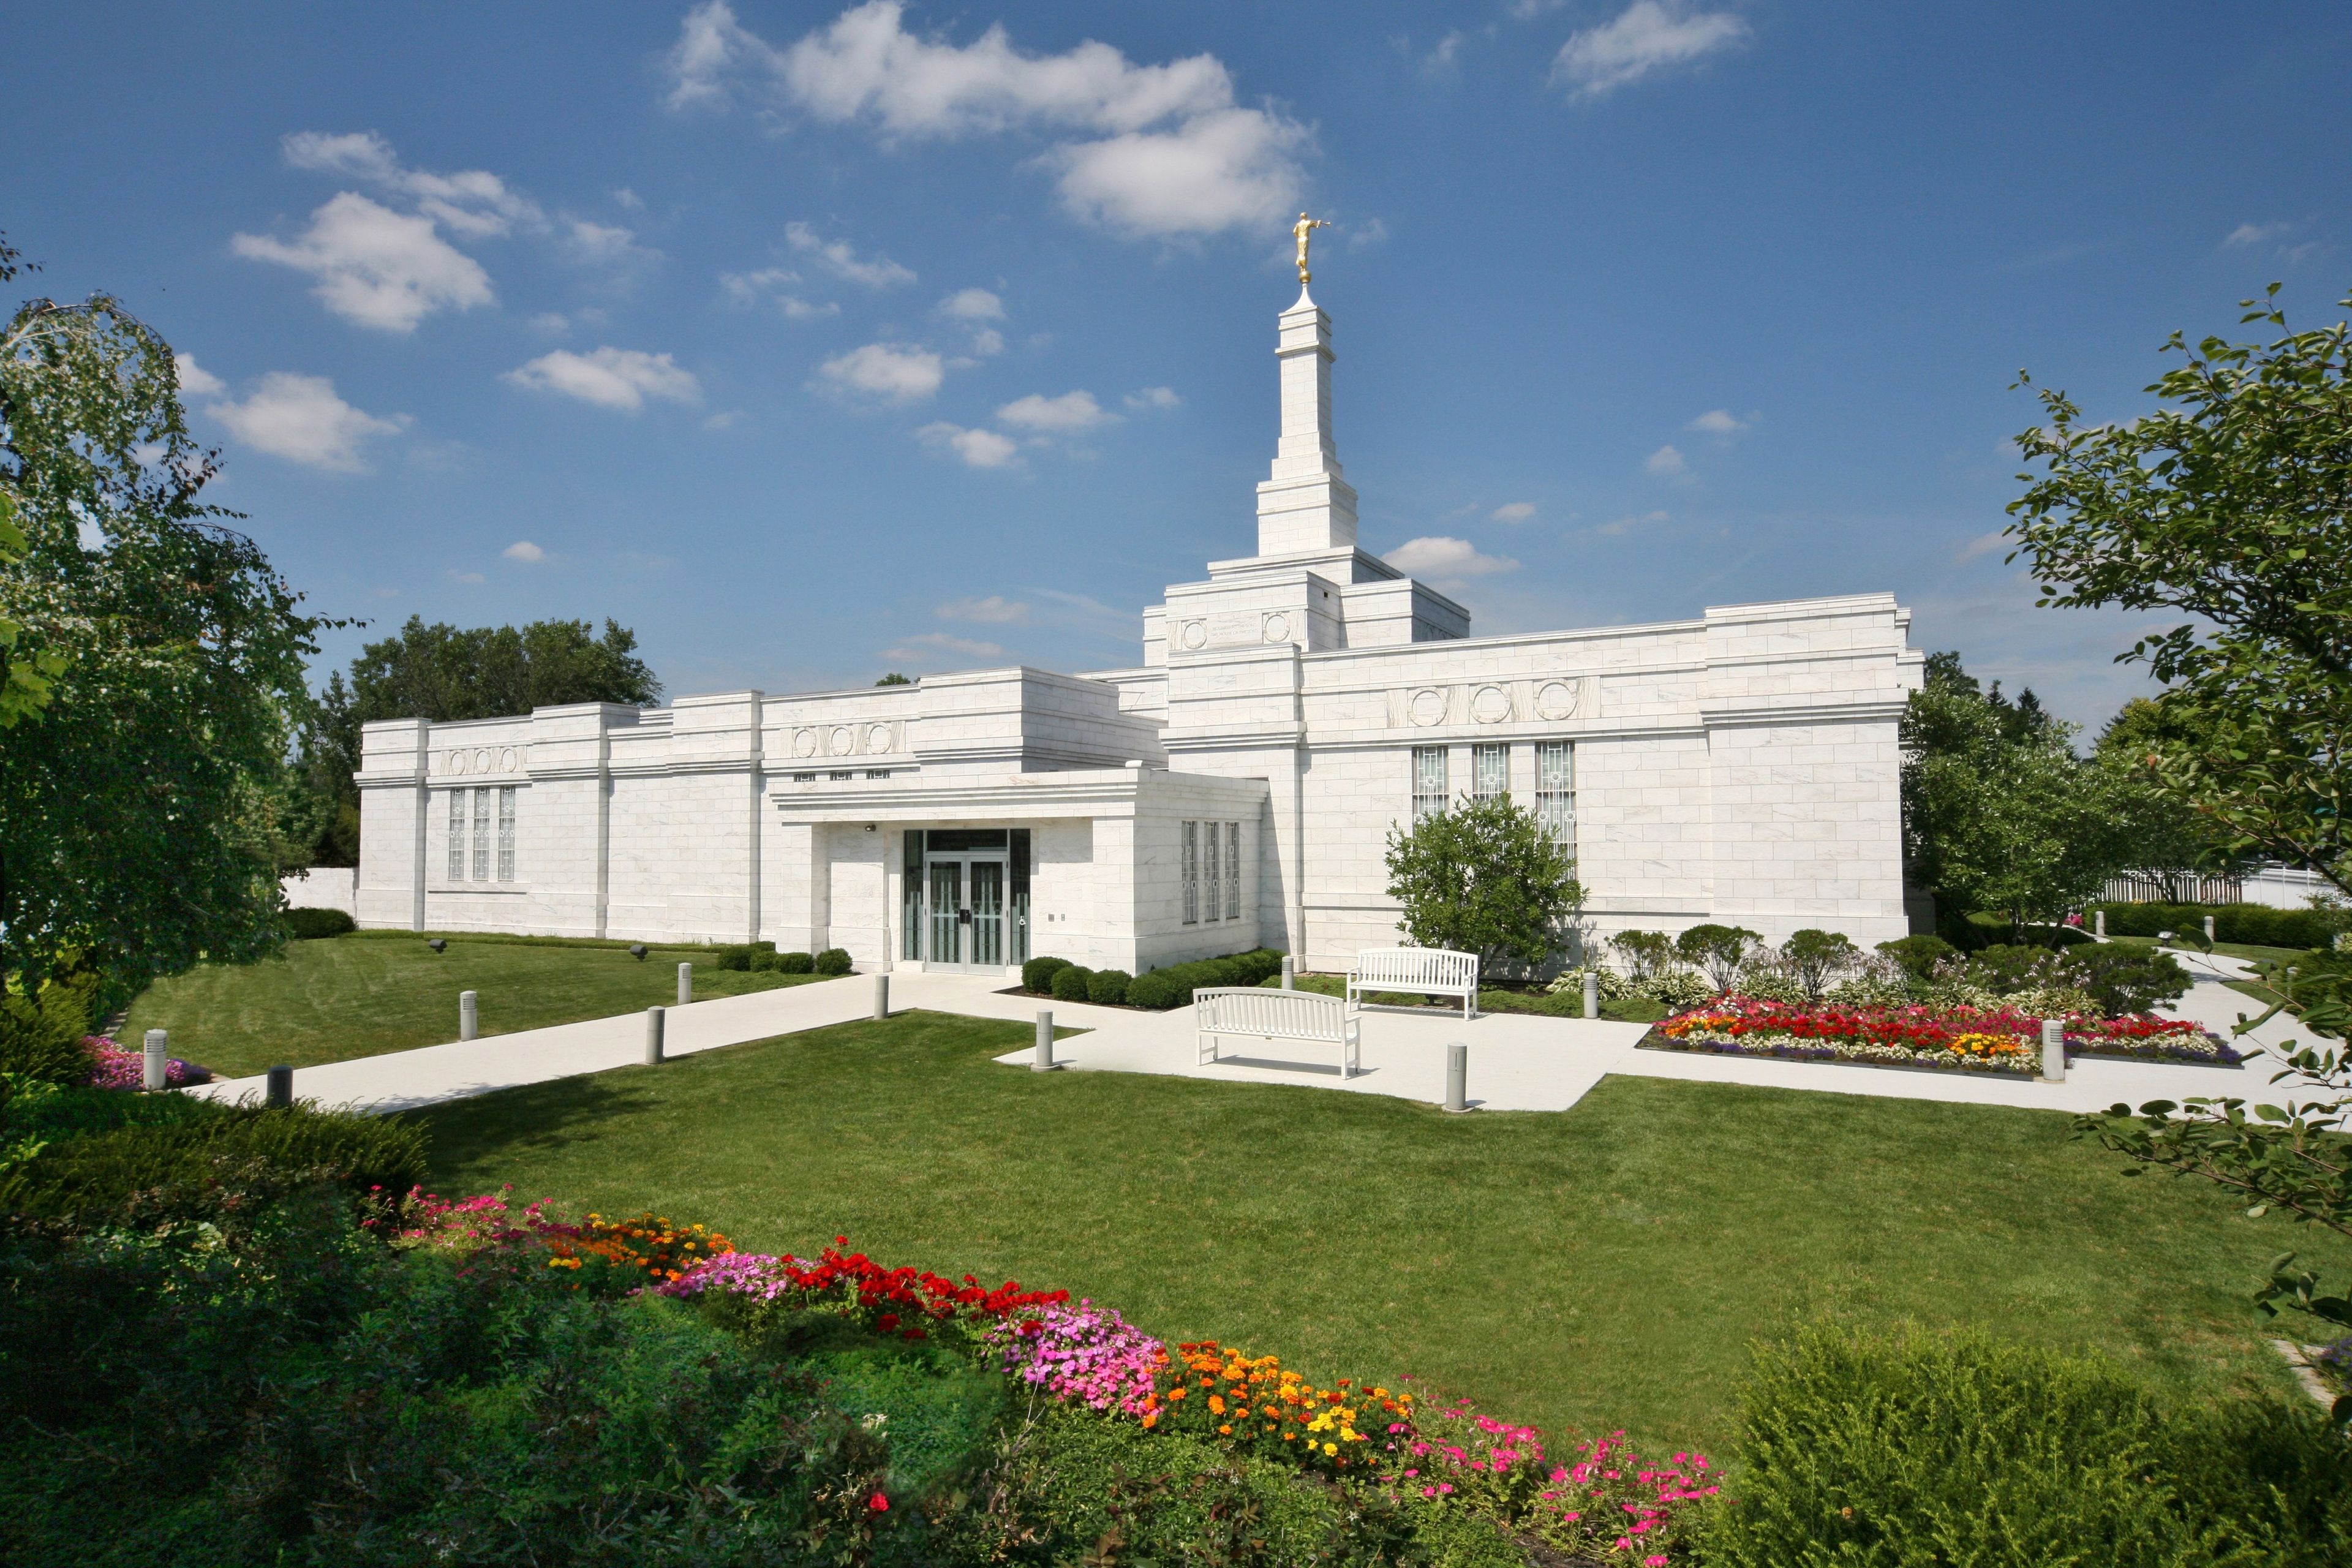 The Columbus Ohio Temple during the daytime.